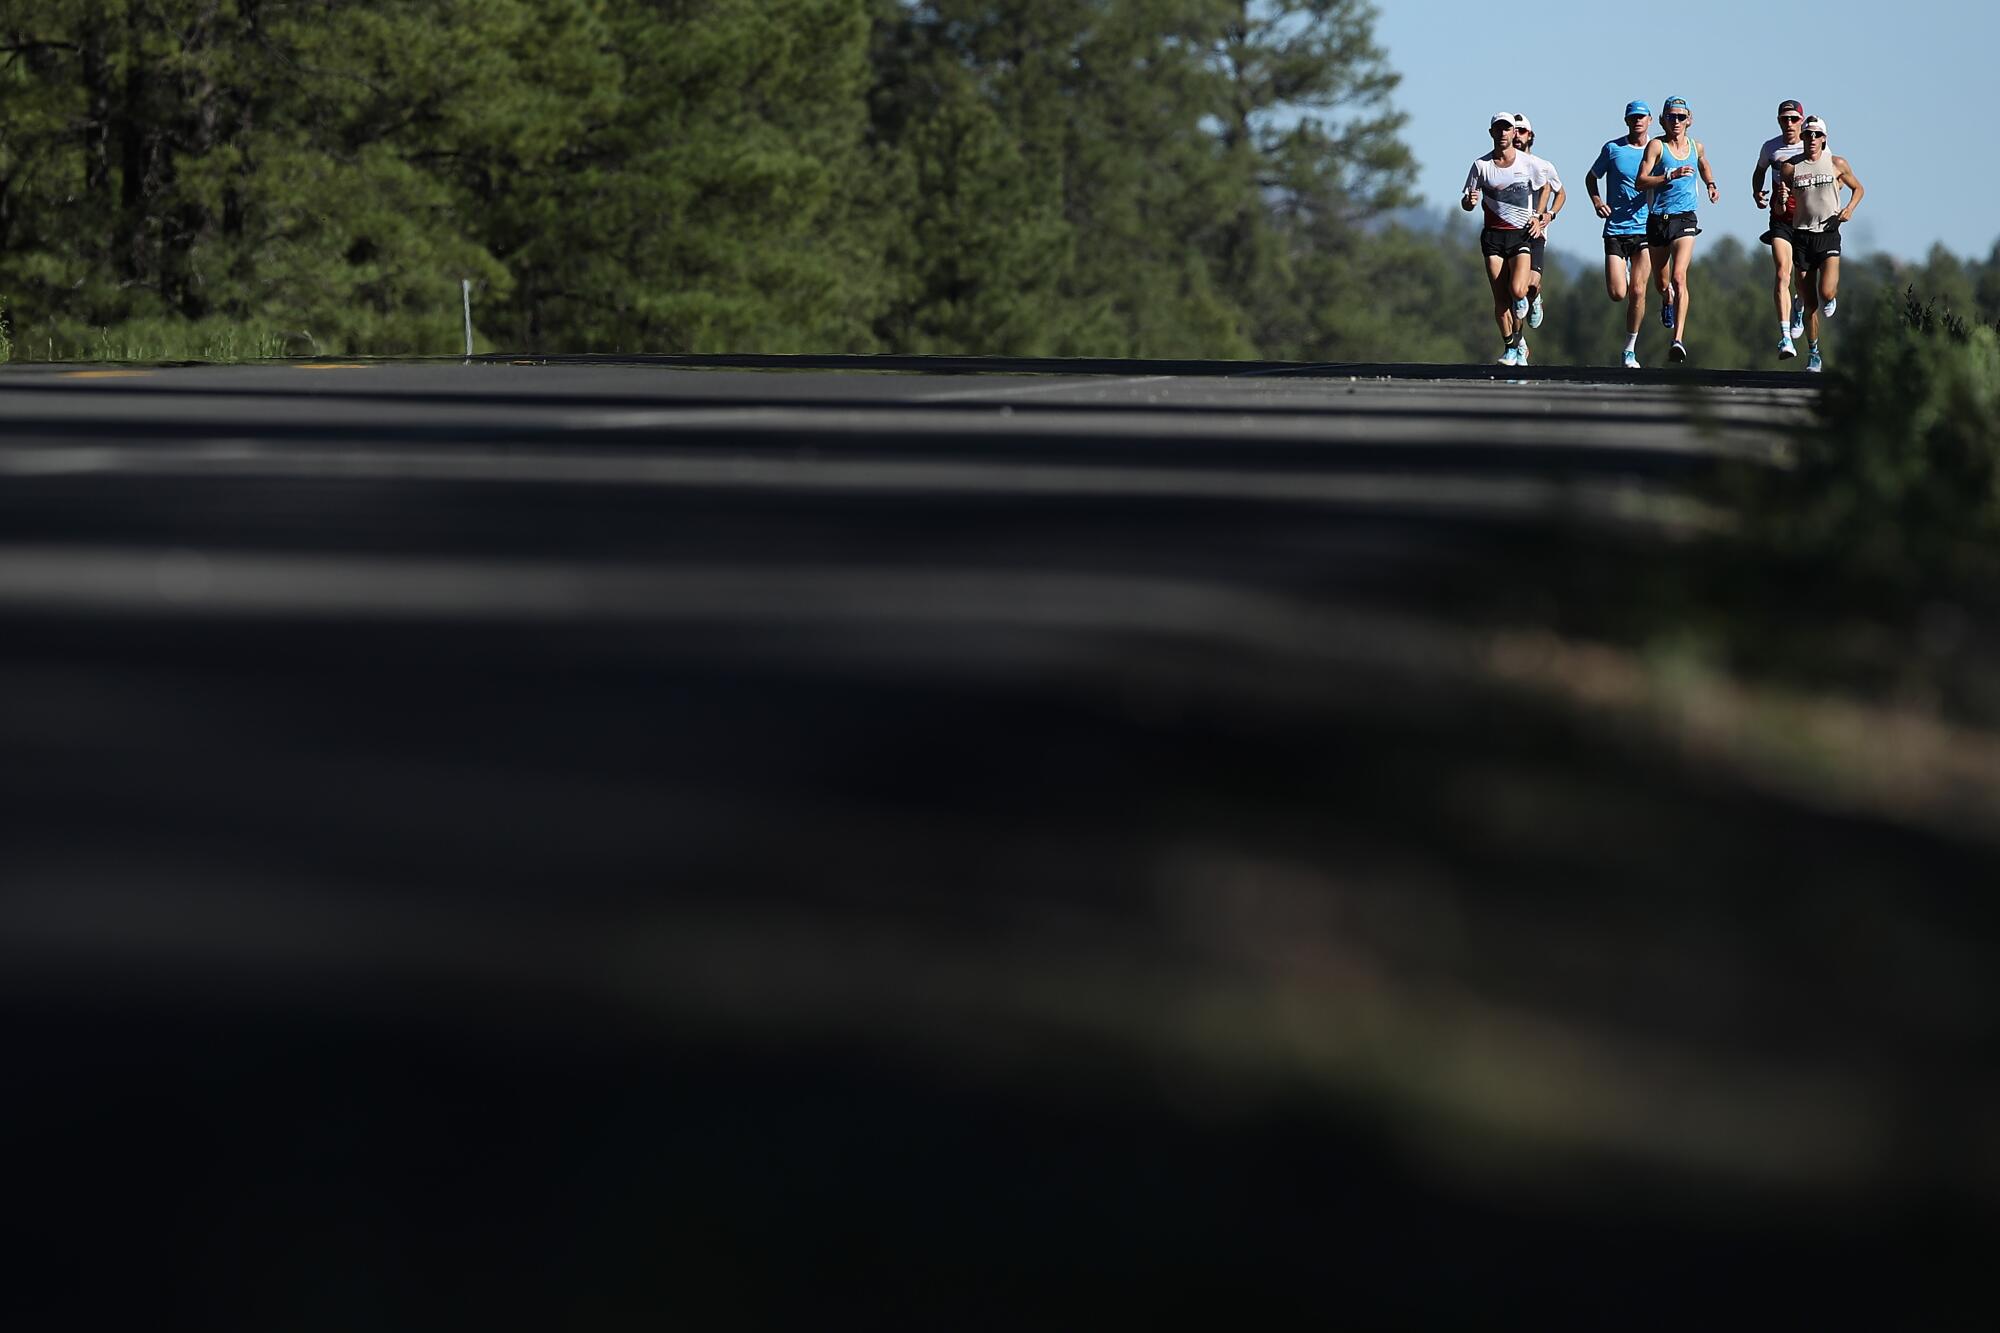 A group of runners from New Zealand train on a road in Flagstaff.